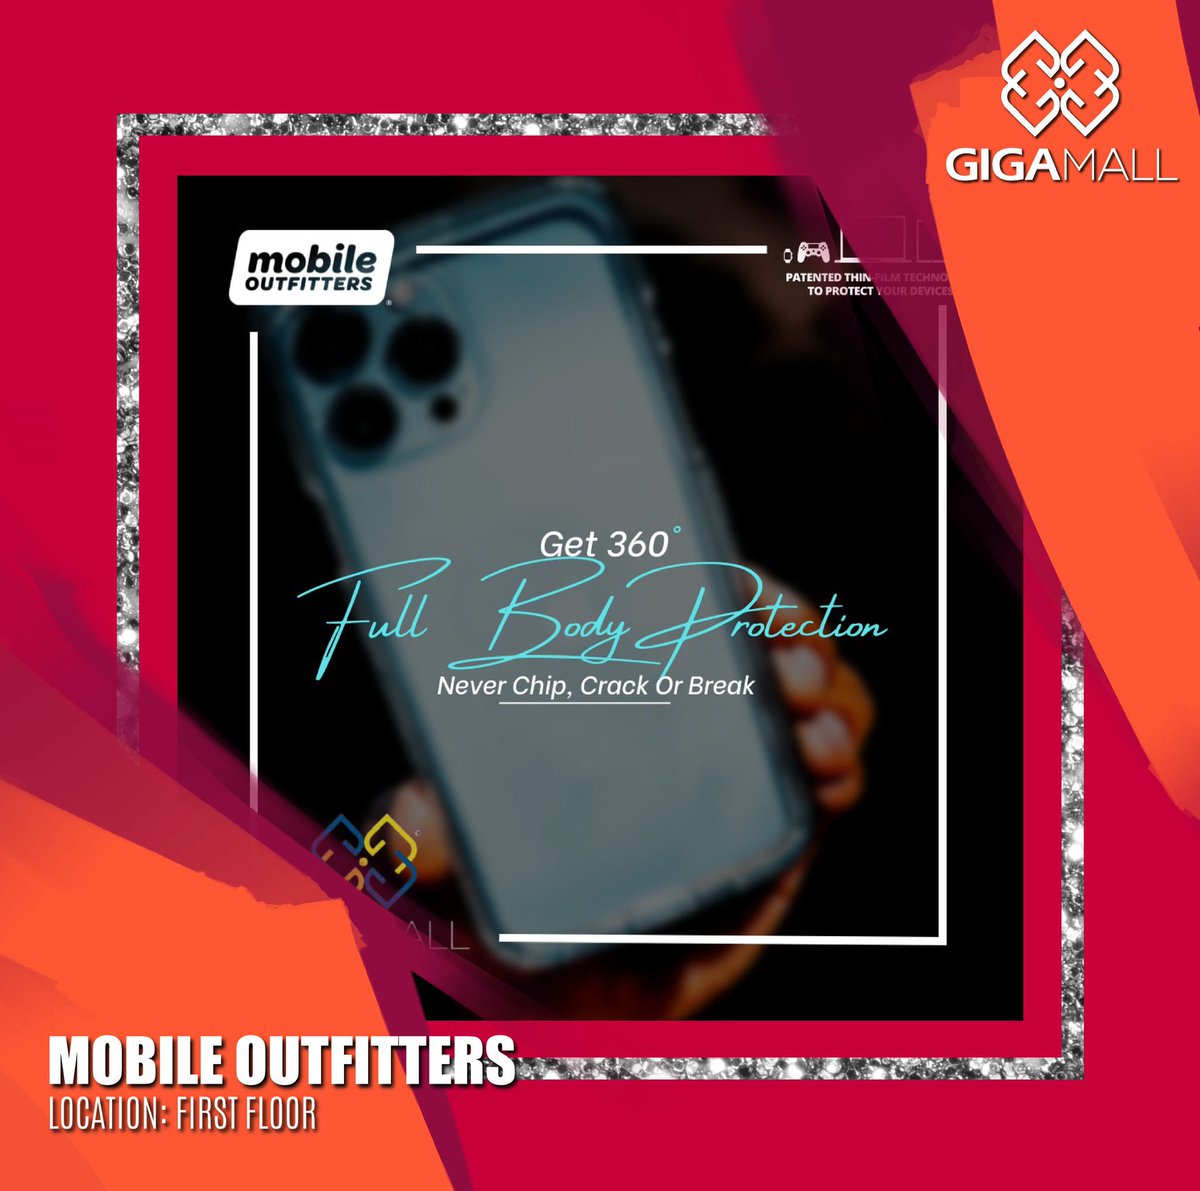 To get the service, visit Mobile Outfitters outlet located on the First Floor.
#gigamall #gigagroup #shoppingmall #shopping #mobileouttiffers #MobileOutfitterspk #ScreenProtection #impactprotection #clearcoat #mobileoutfittersgigamall #WTCPAK